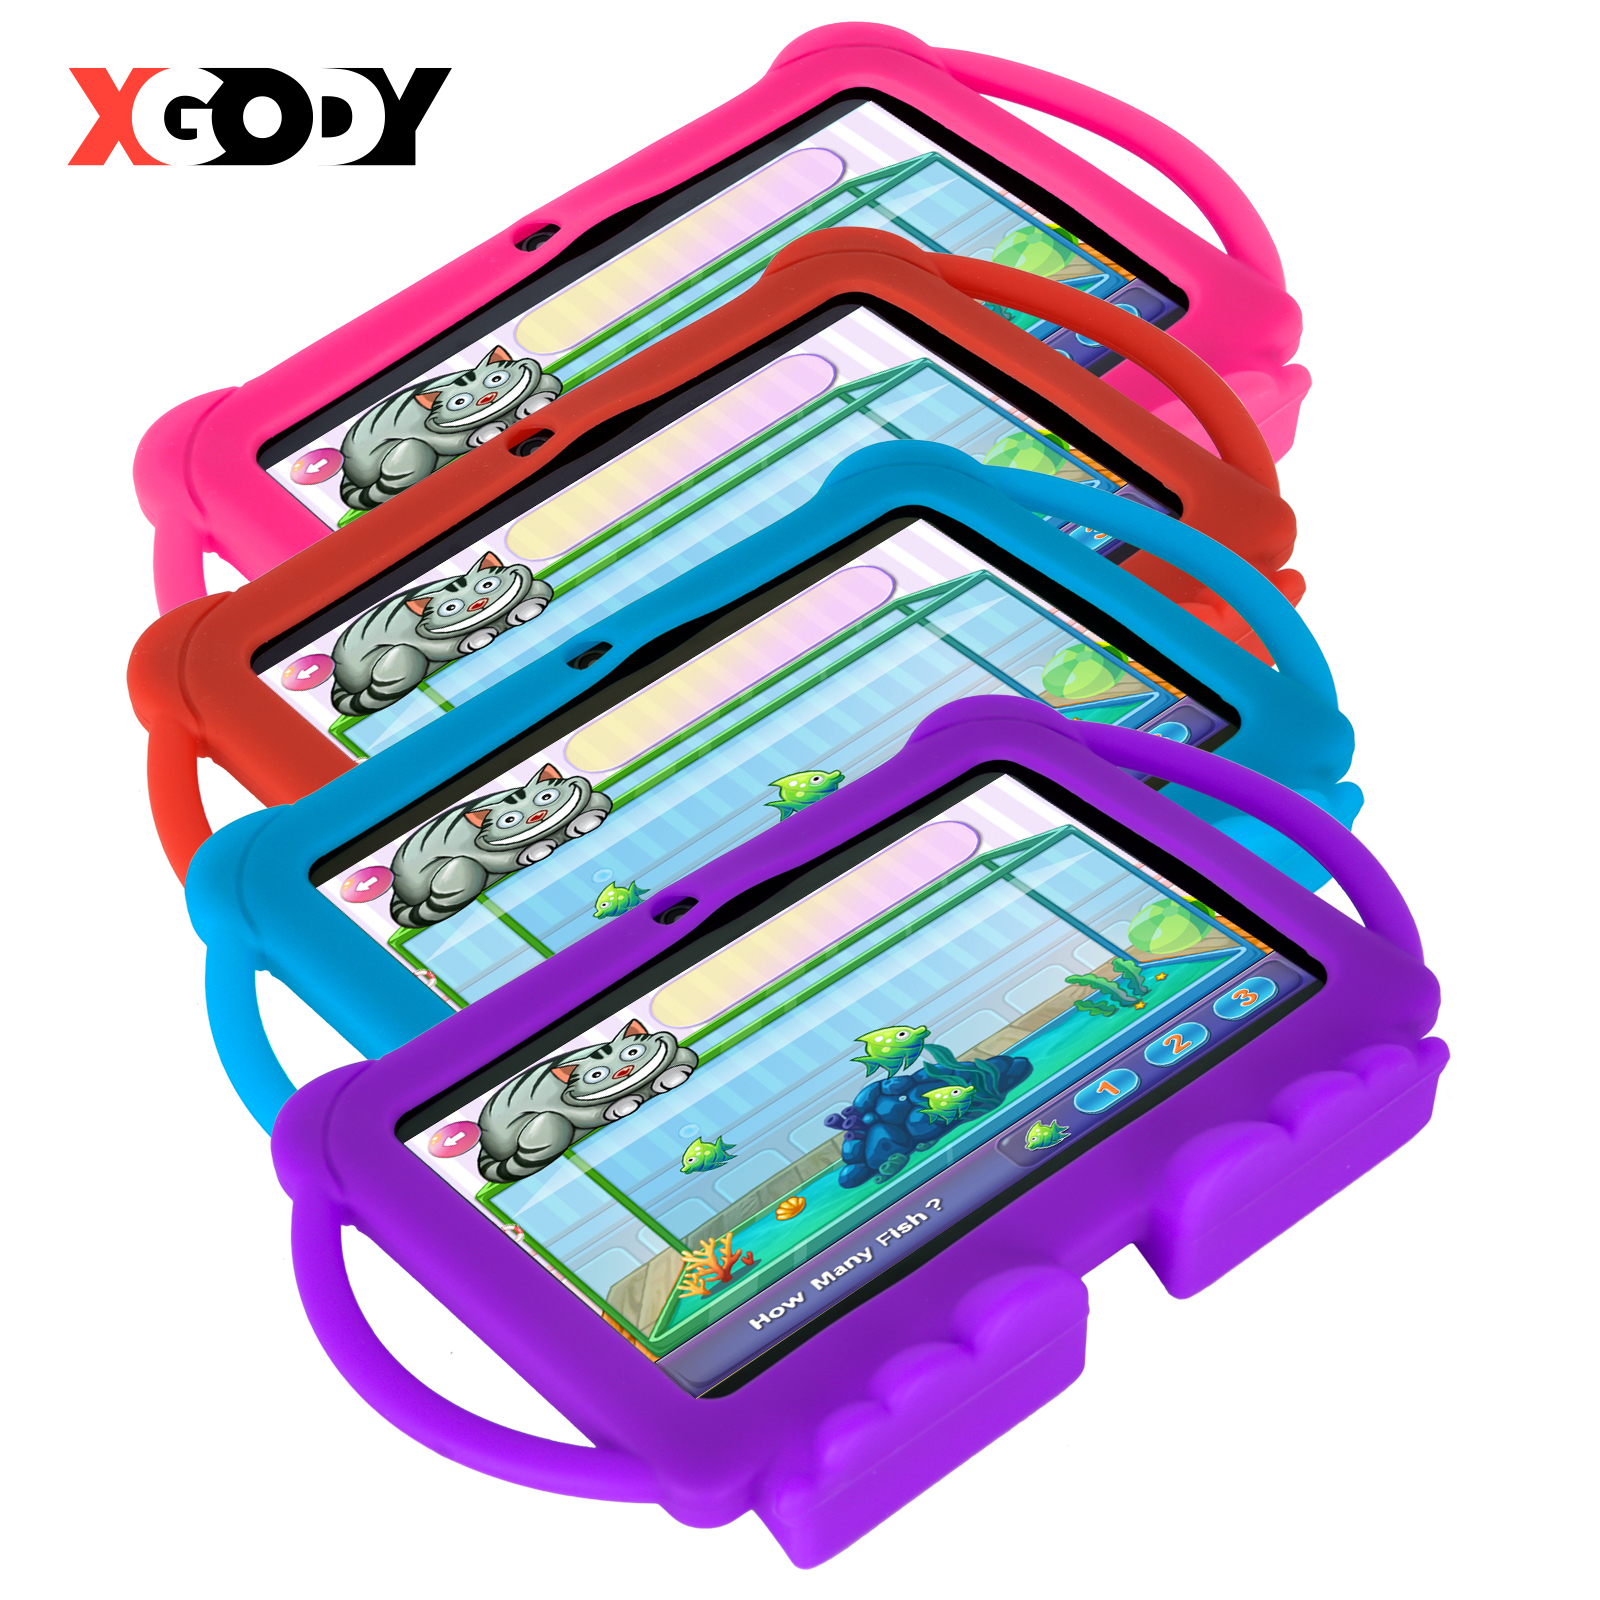 XGODY 2021 Android 8.1 7" 16GB Quad Core Kids Children Table